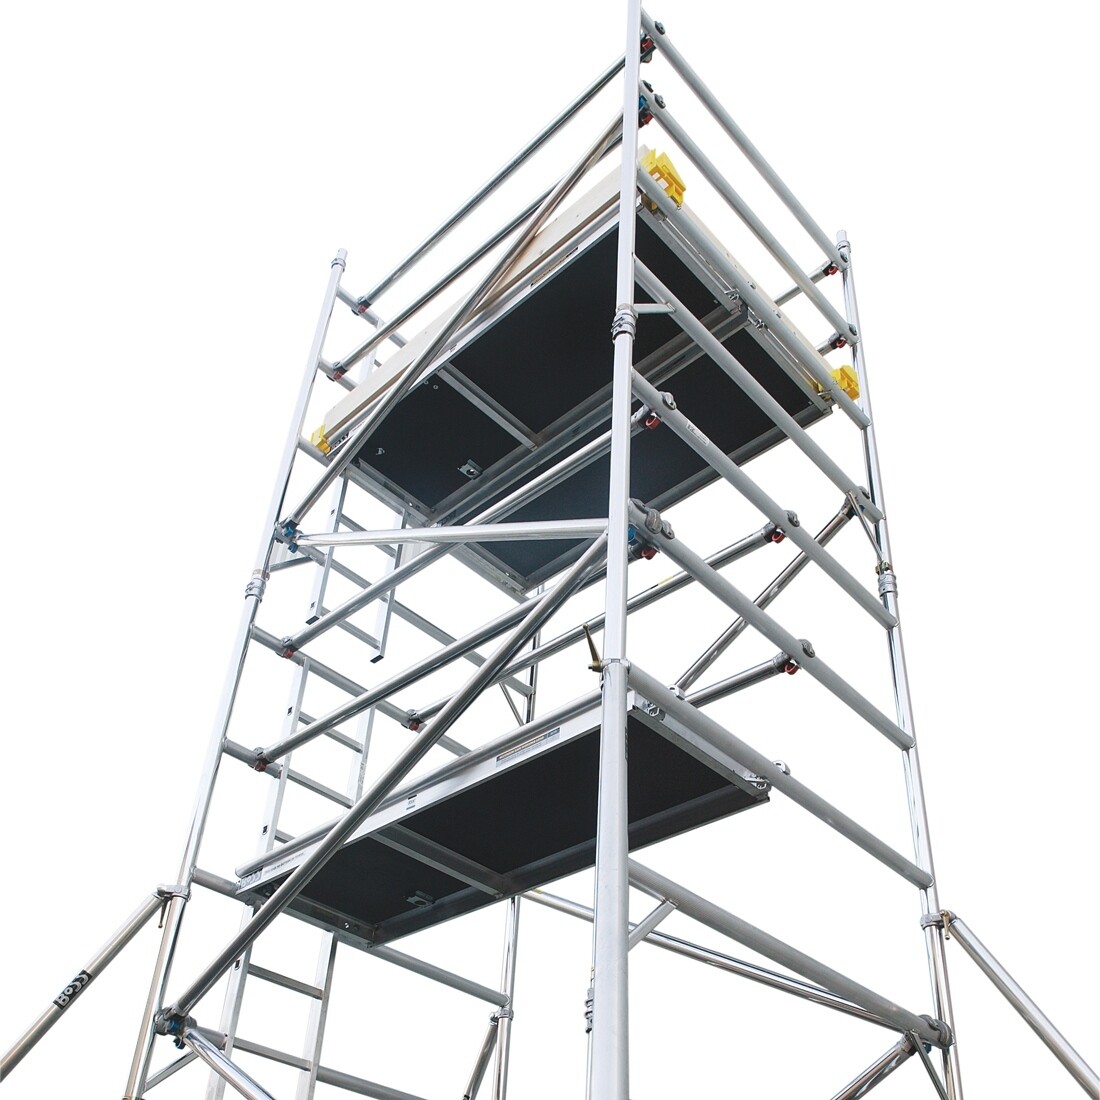 MOBILE TOWER - 1.4M WIDE x 1.8M LONG x 2.4M HIGH